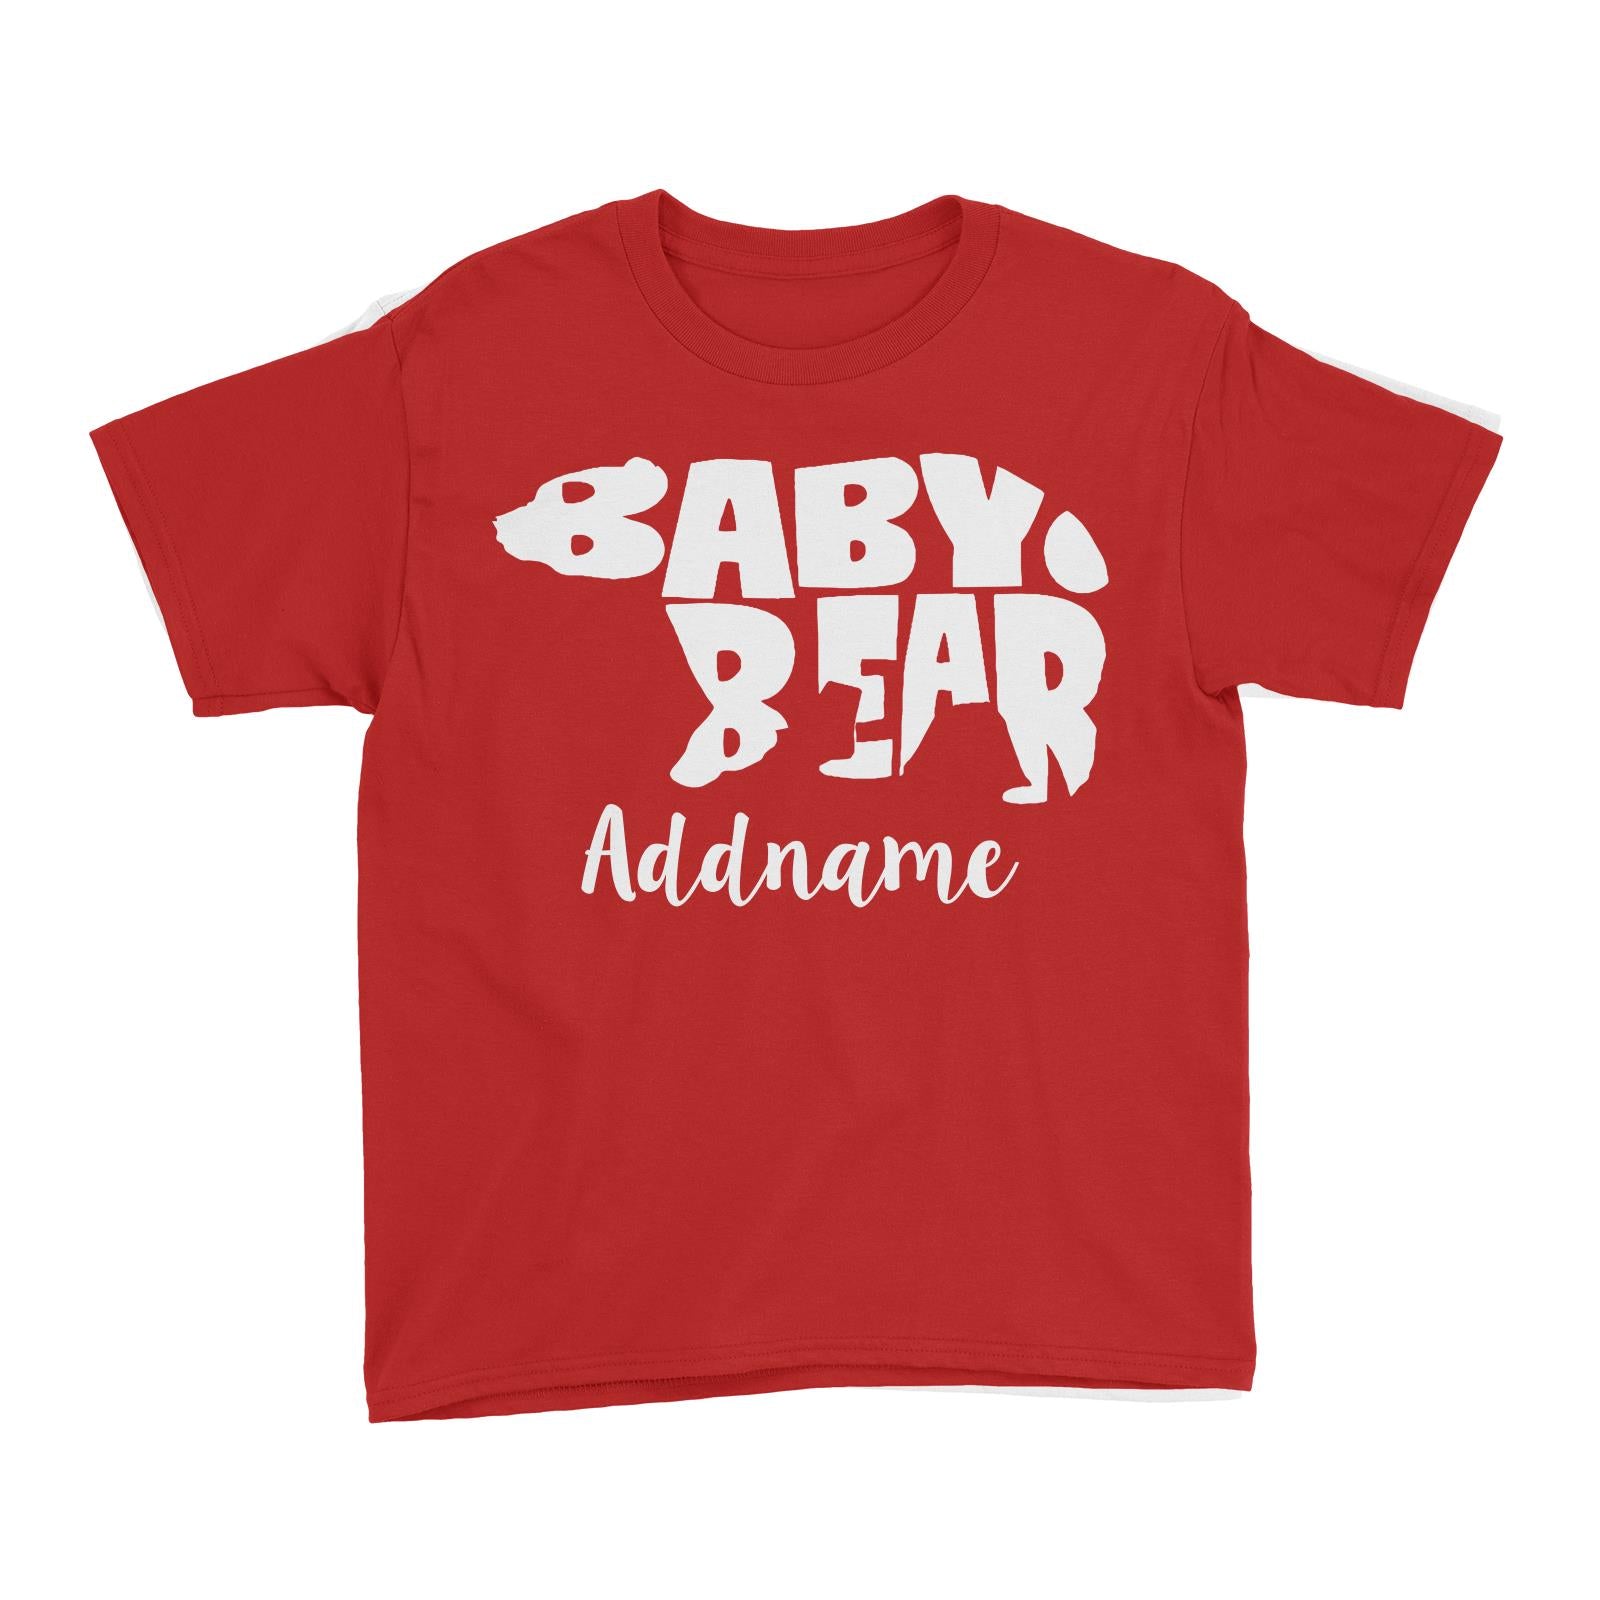 Baby Bear Silhouette Addname Kid's T-Shirt